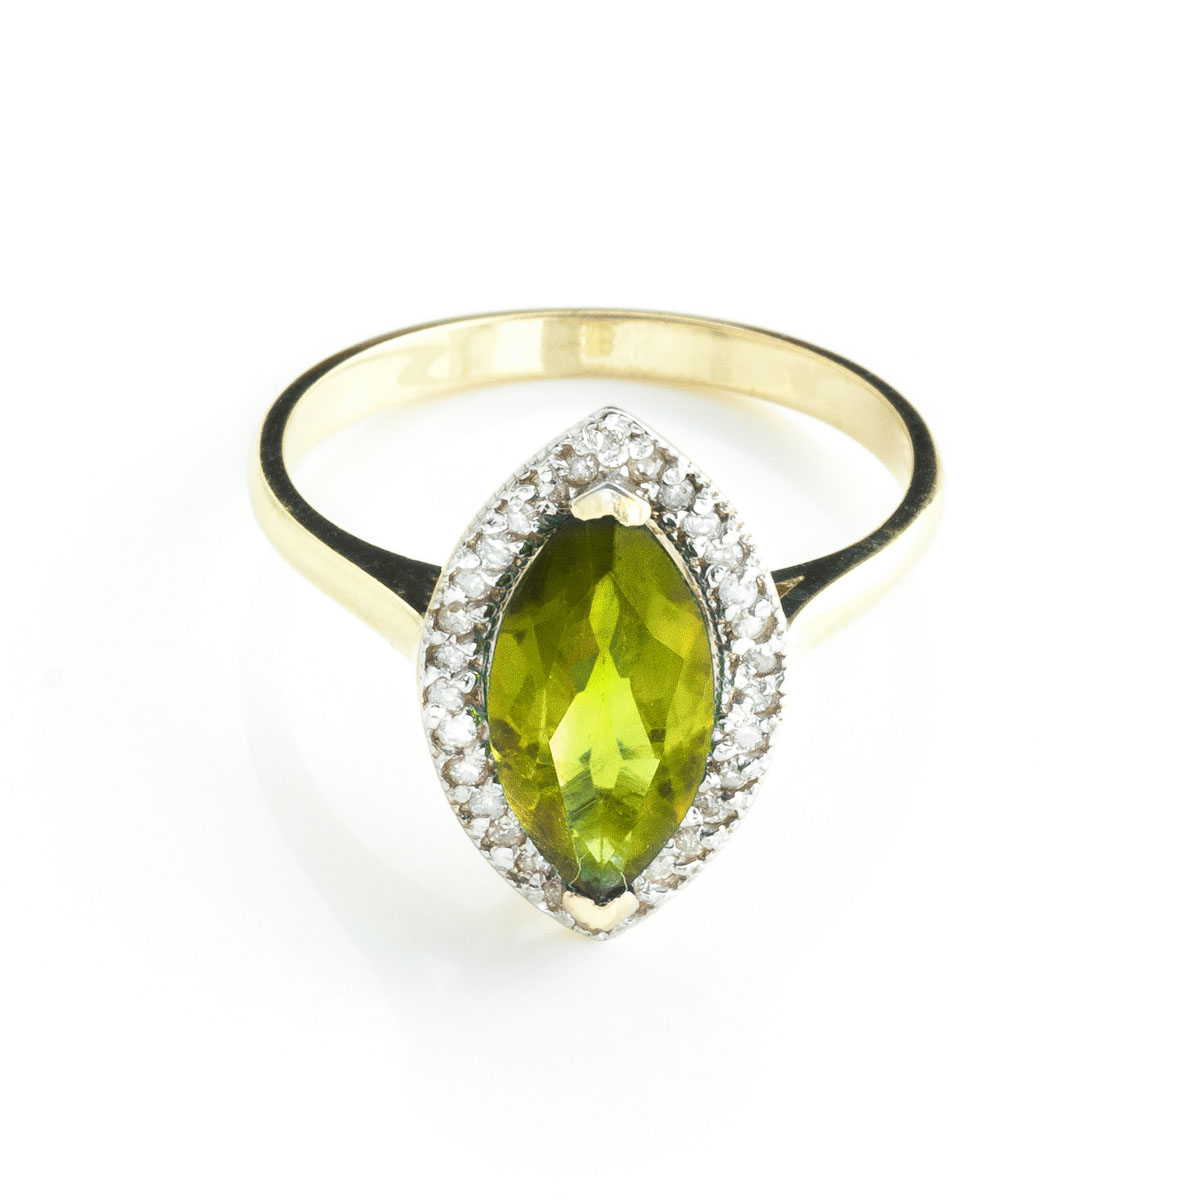 Peridot Halo Ring 2.15 ctw in 9ct Gold